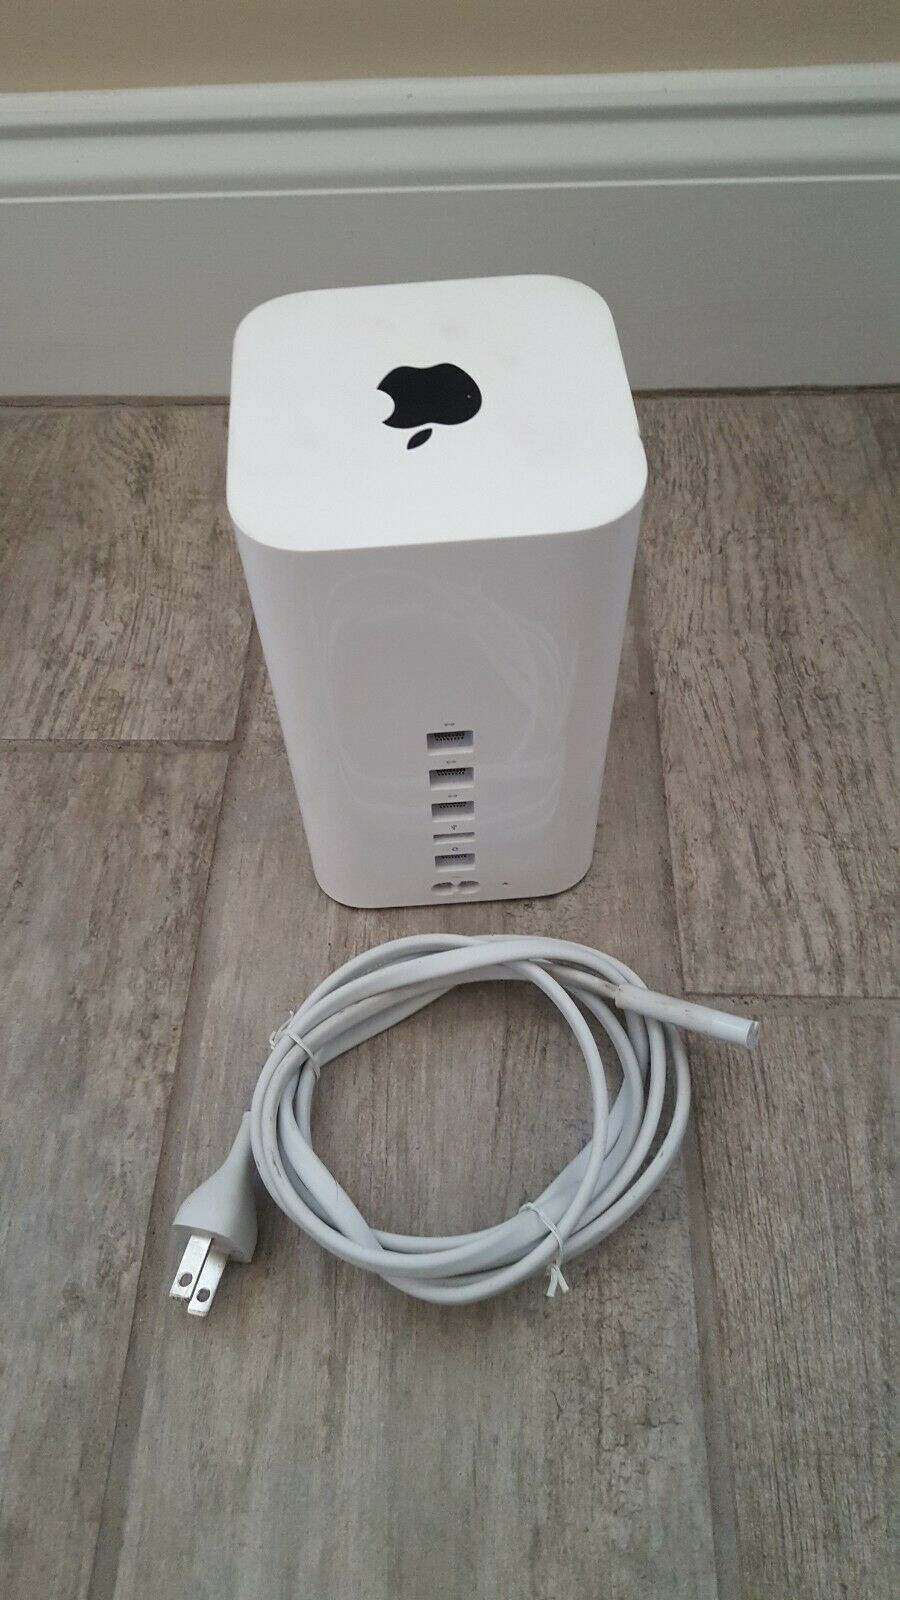 apple airport extreme base station manual